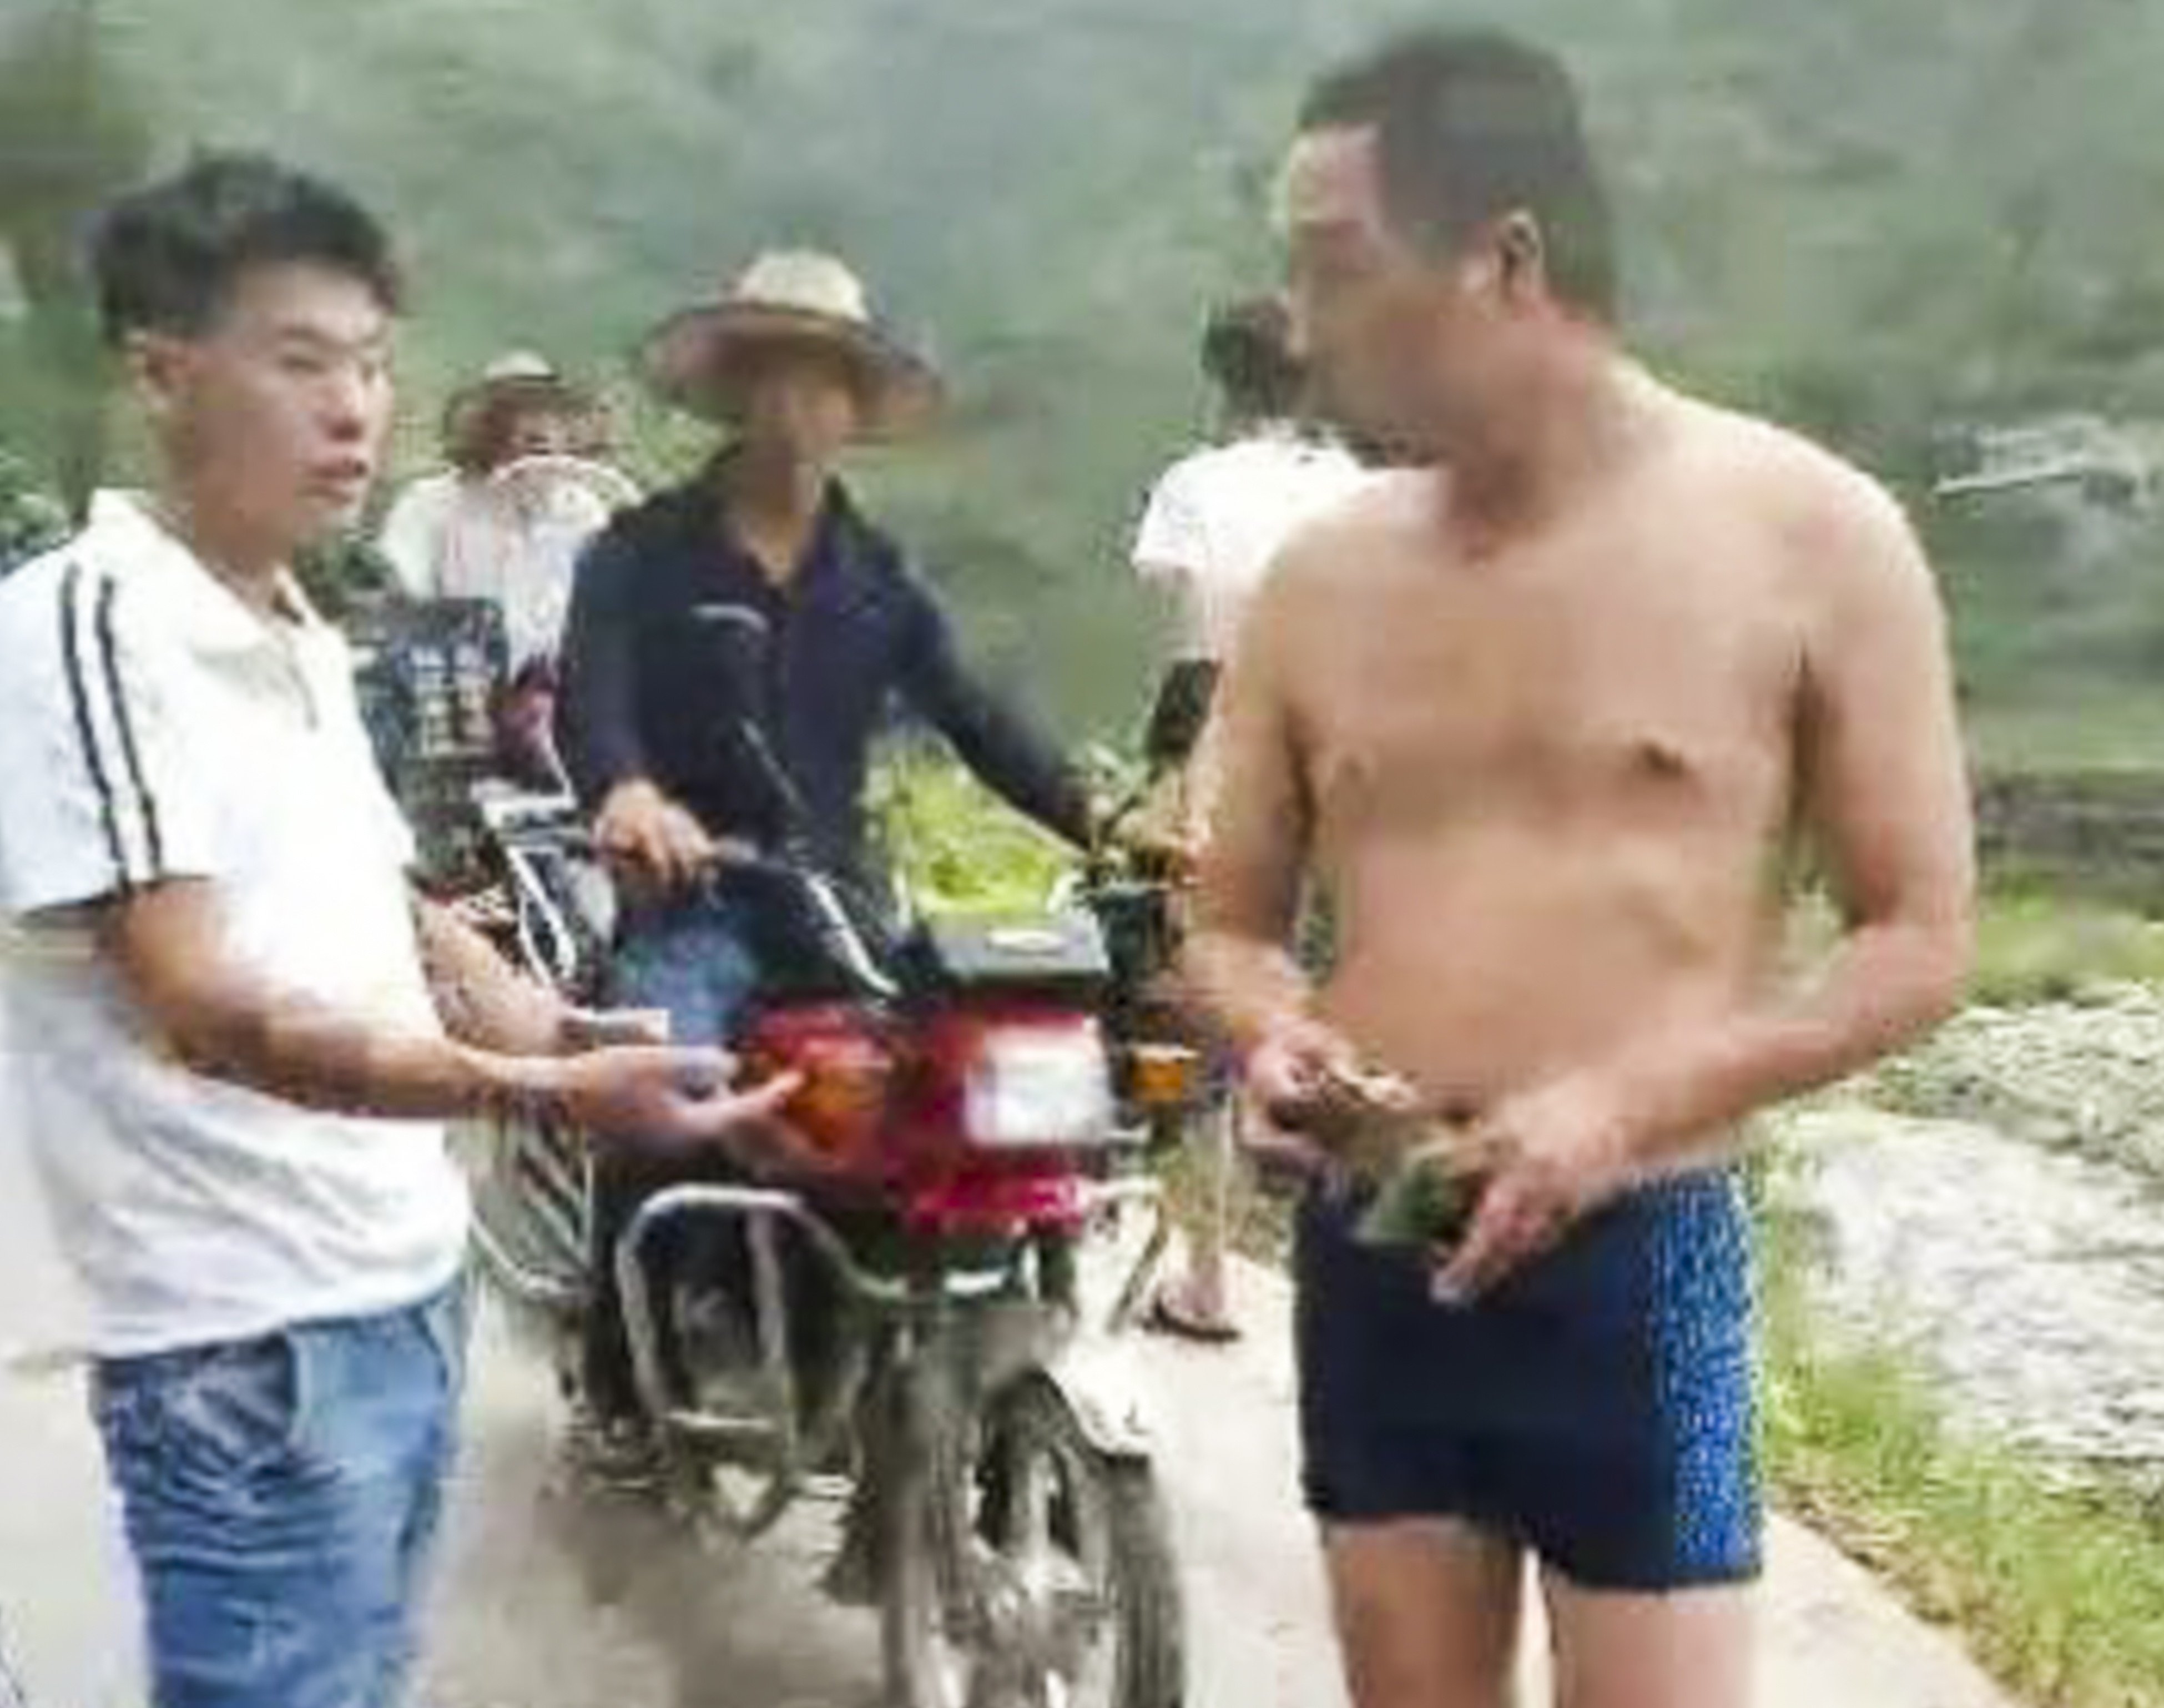 The motorcyclist was unconvinced that a man wearing swimming trunks was a police officer. Photo: News.163.com